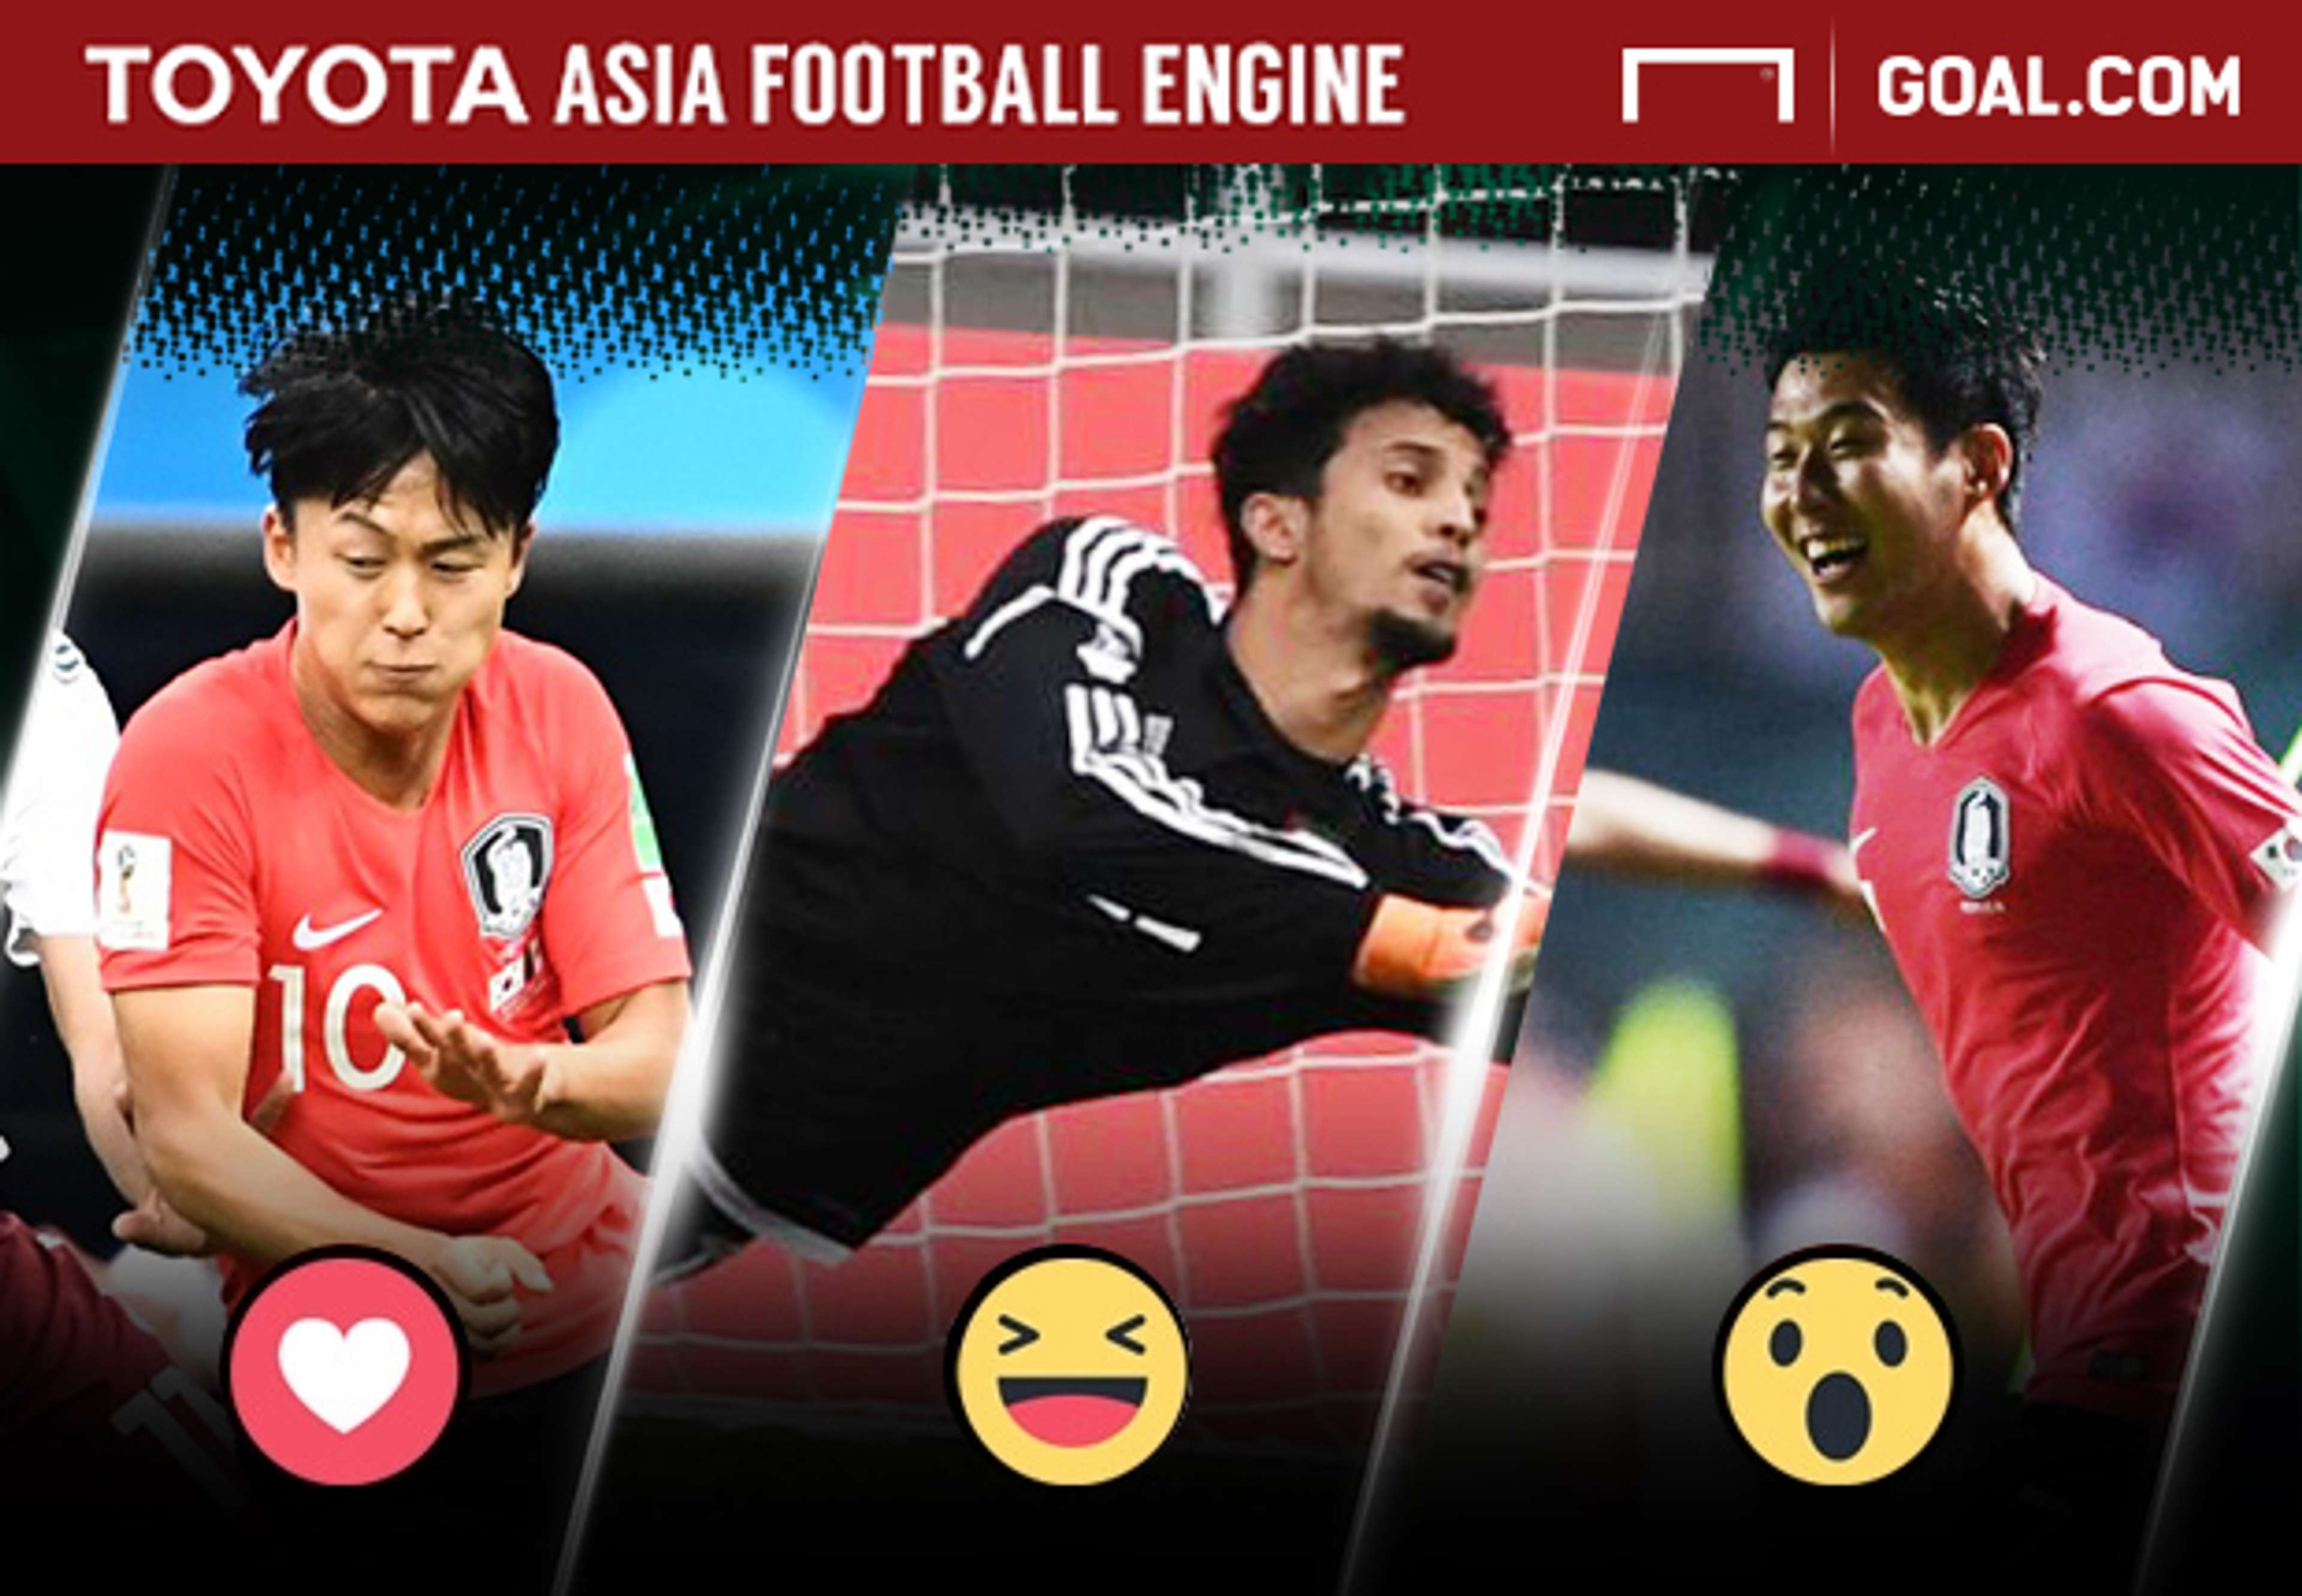 Toyota Polling - Lee Seung-Woo, Mohamed Alshamsi, Son Heung-Min